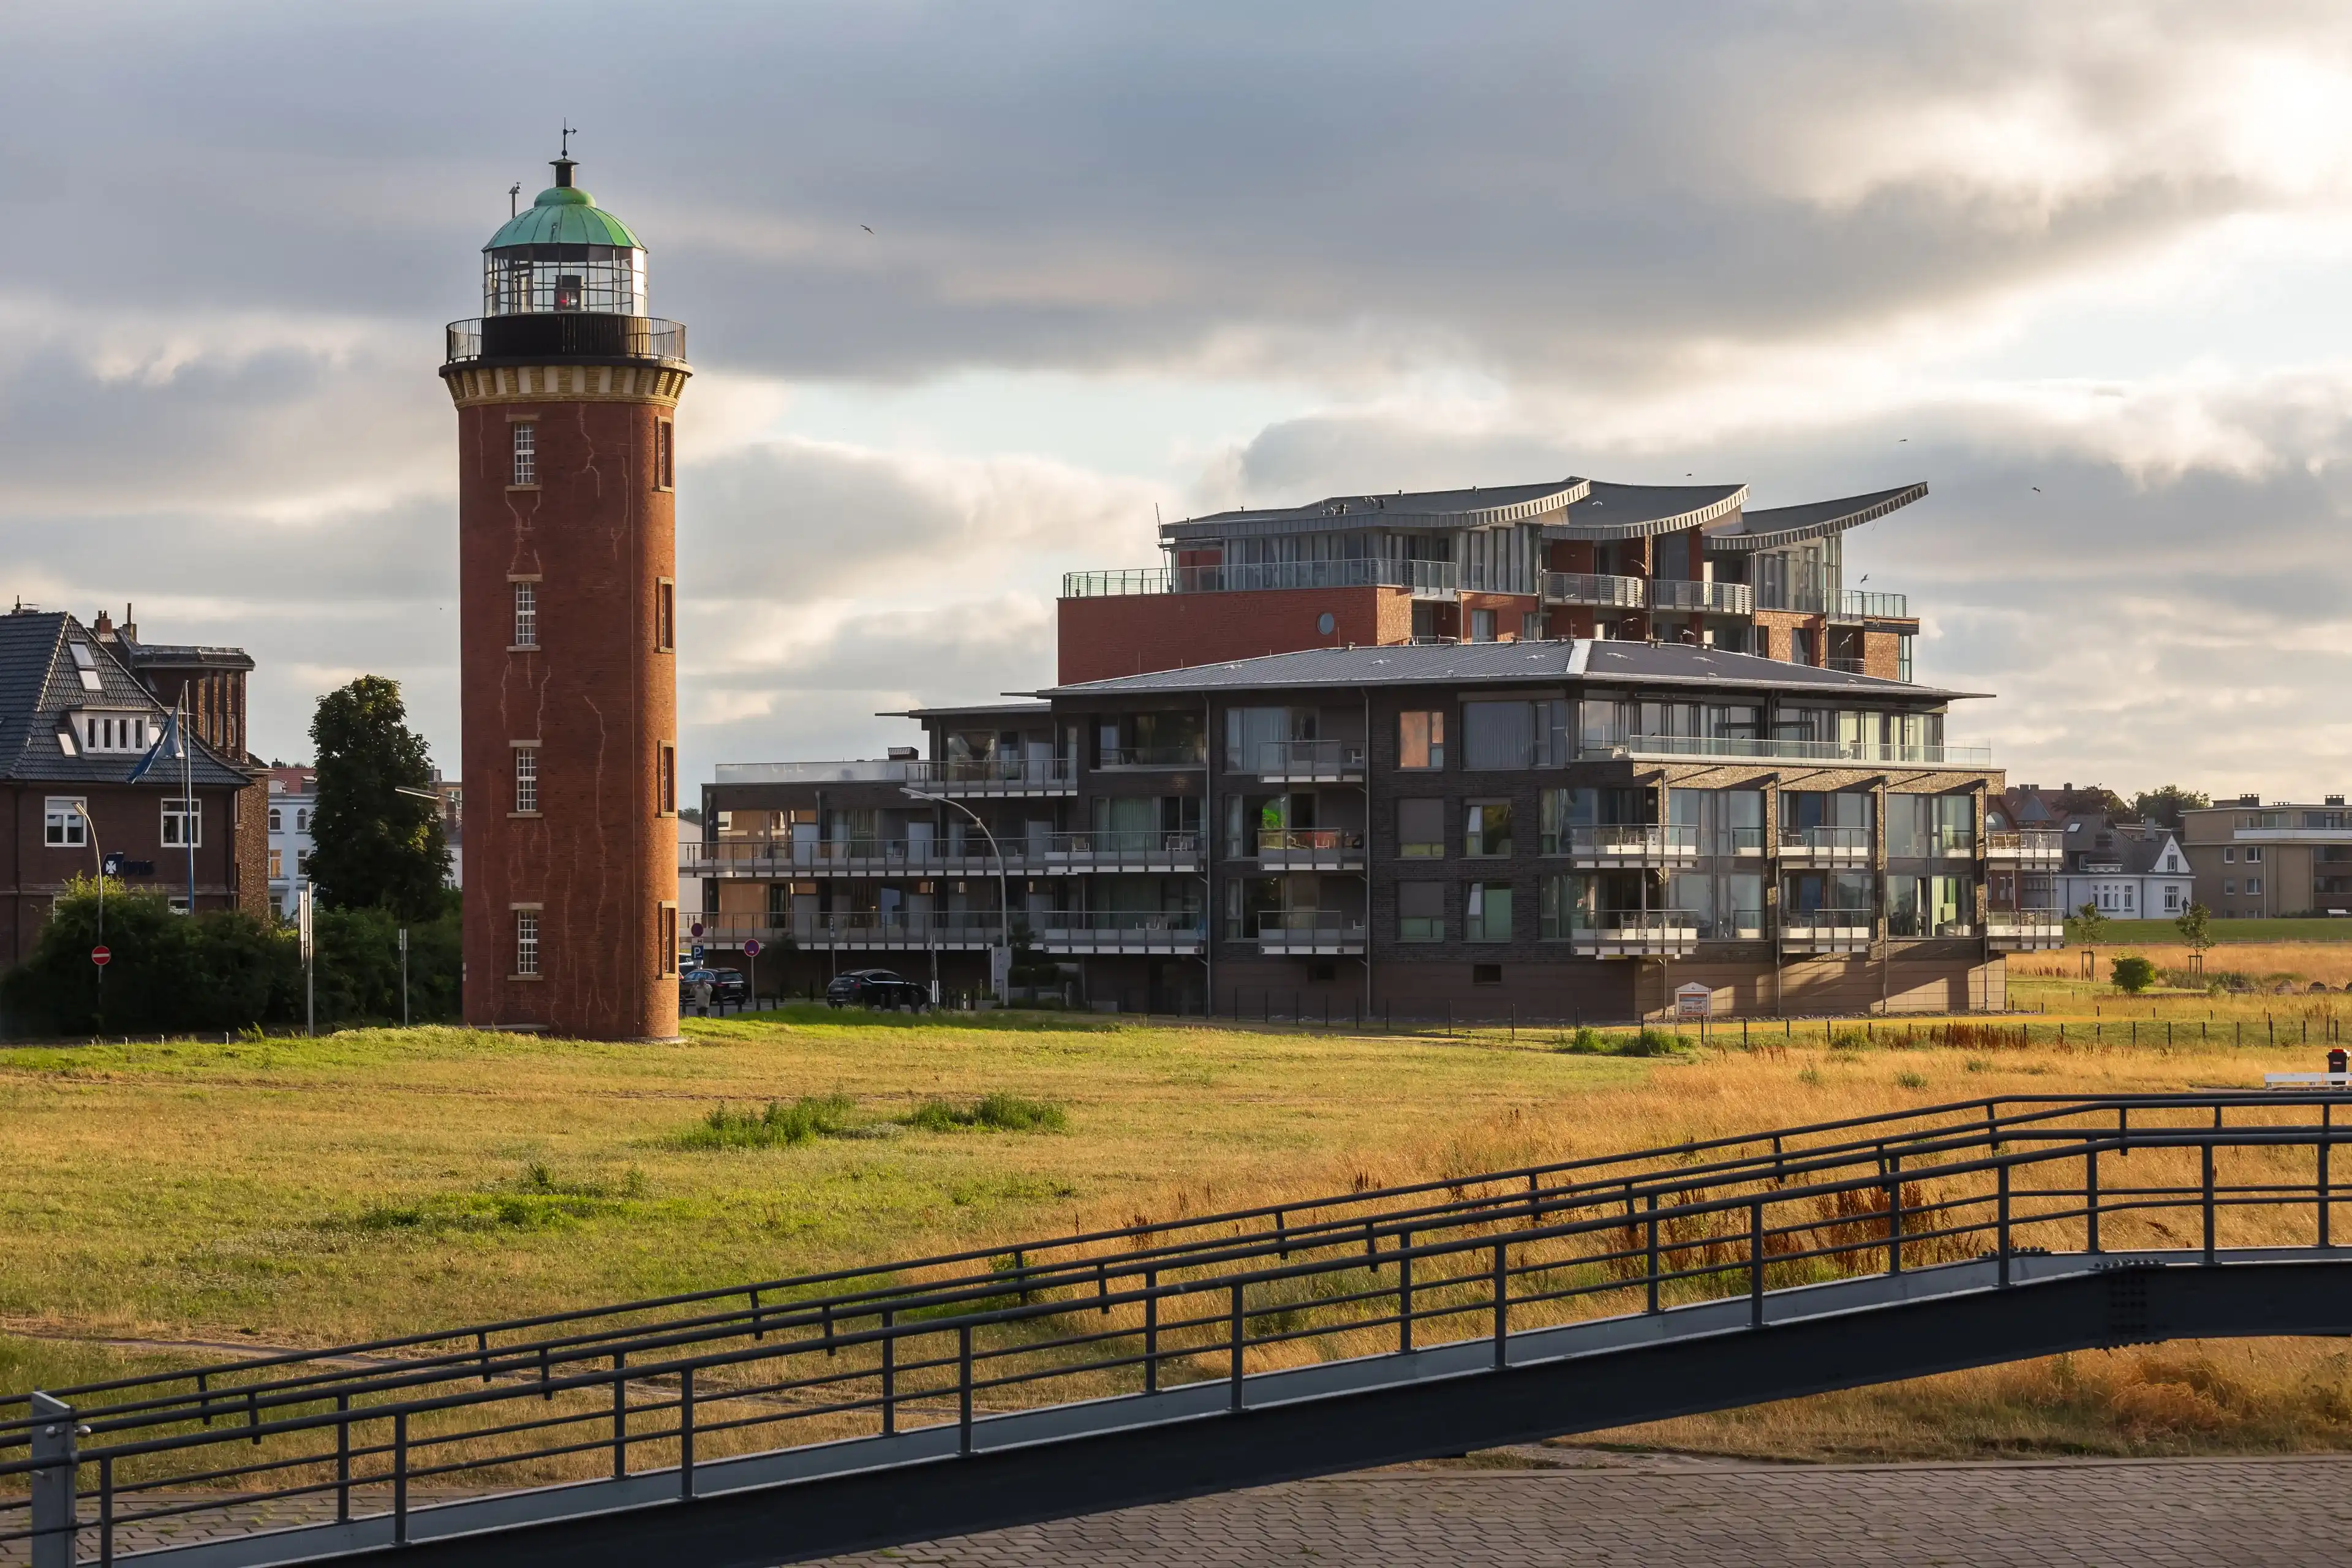 Best Cuxhaven hotels. Cheap hotels in Cuxhaven, Germany